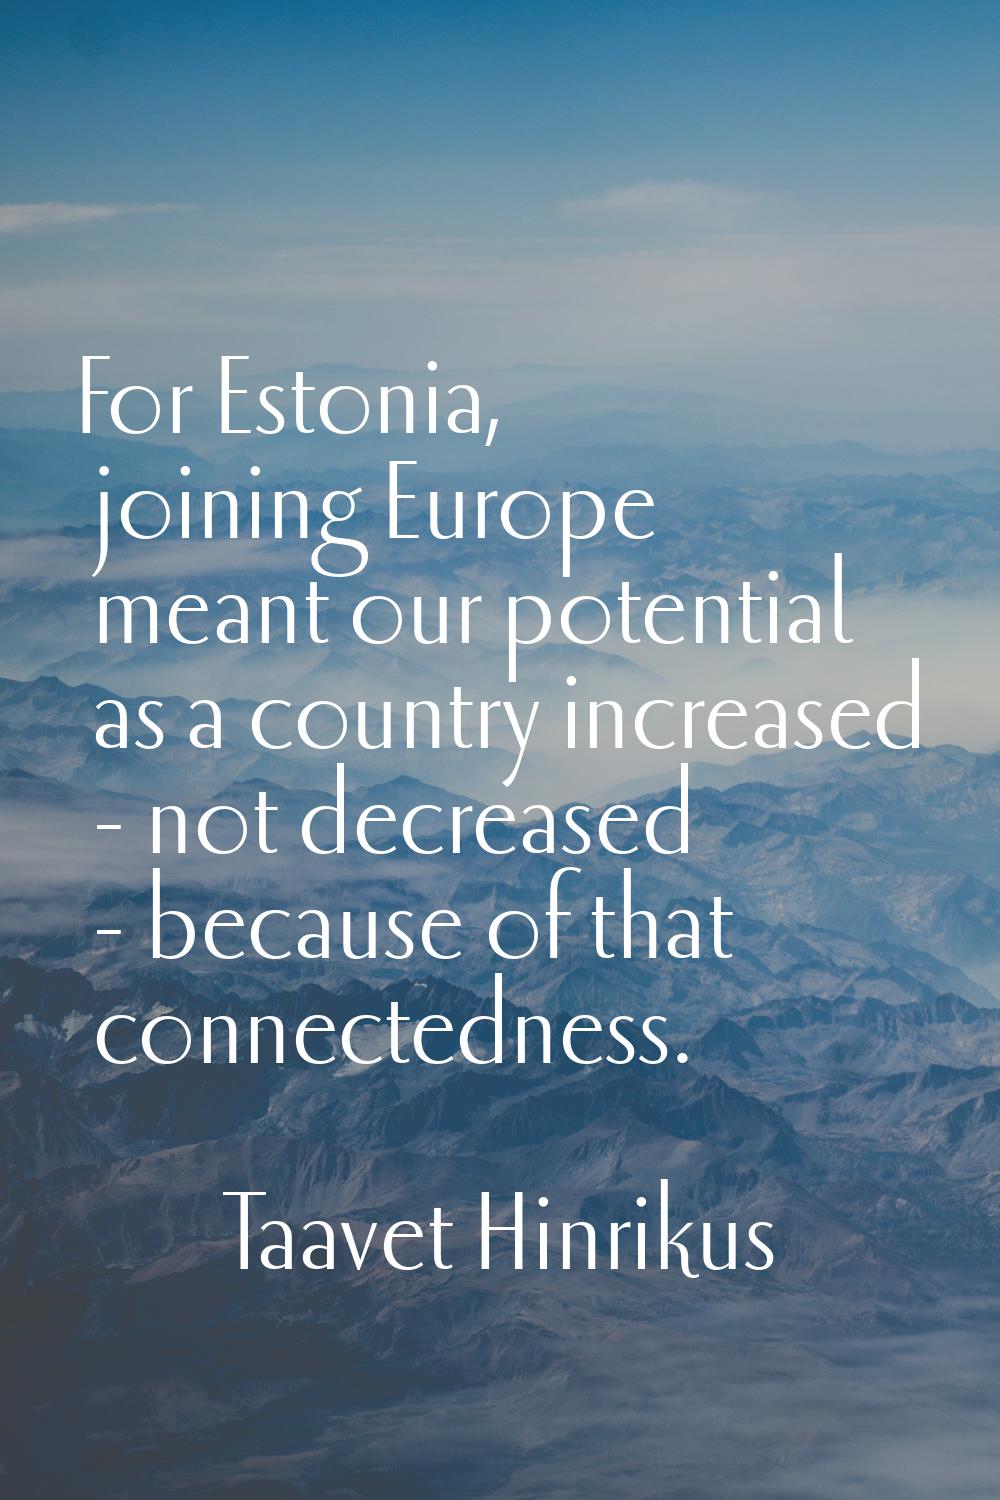 For Estonia, joining Europe meant our potential as a country increased - not decreased - because of